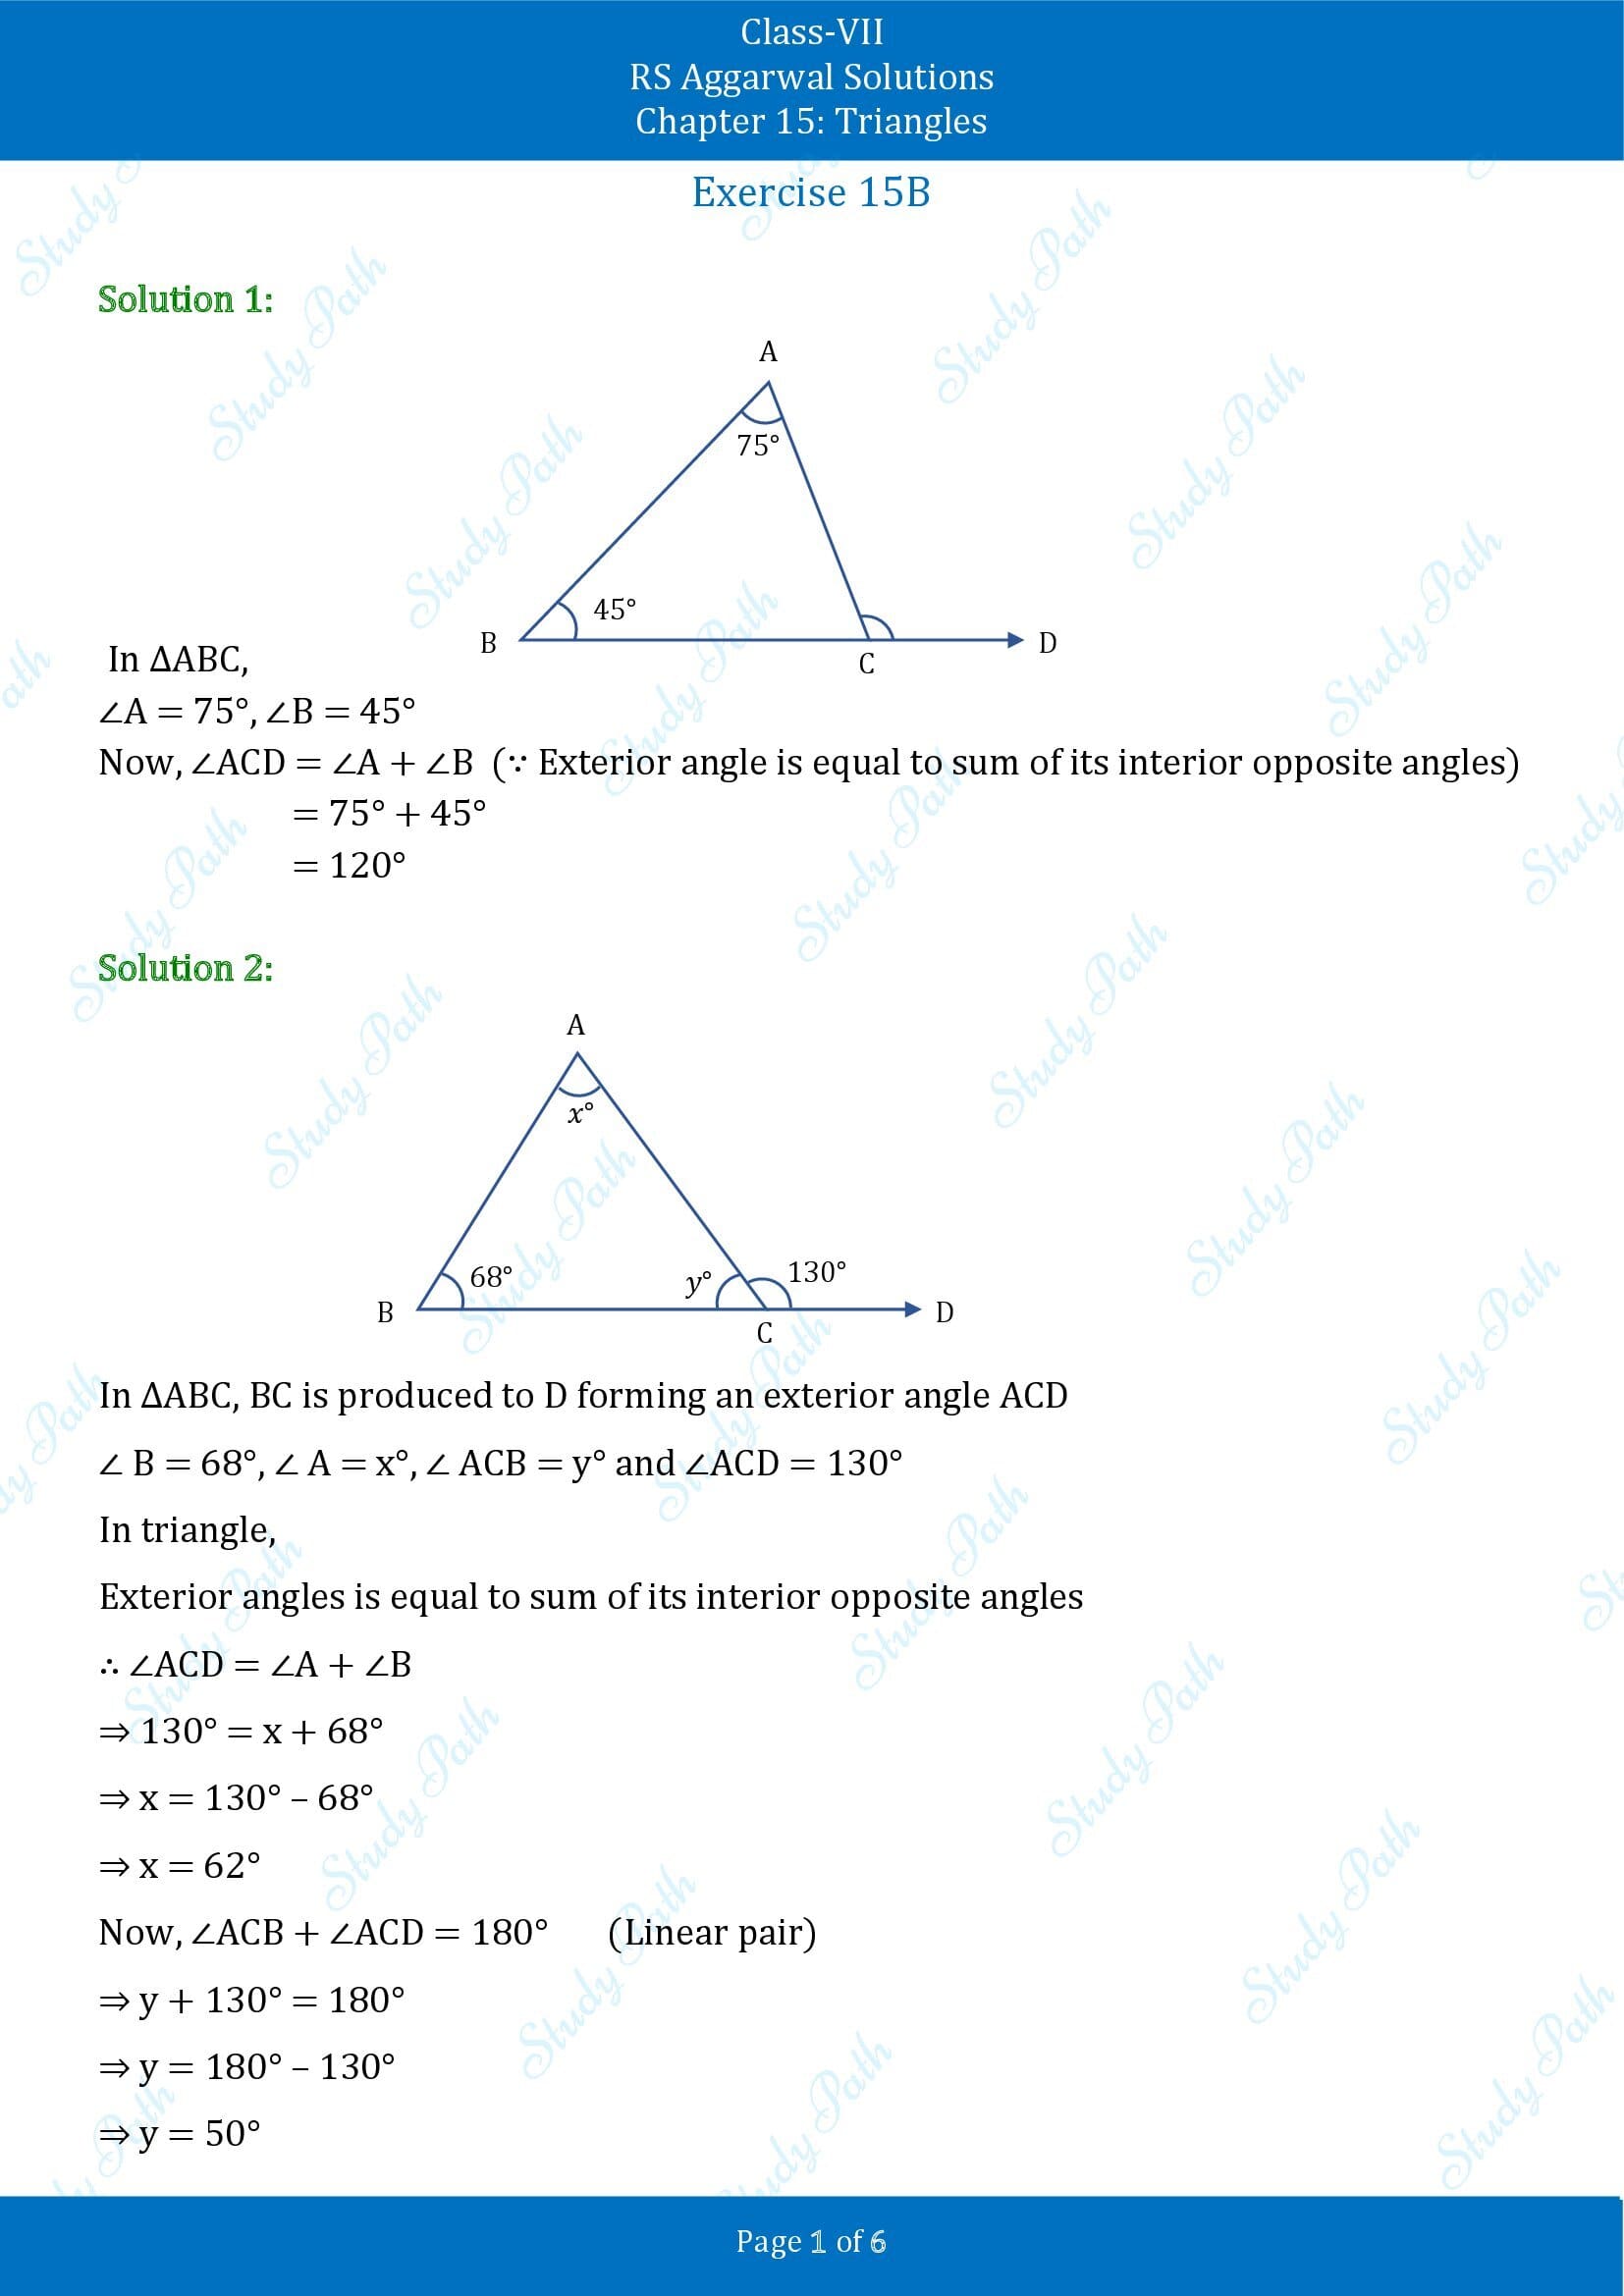 RS Aggarwal Solutions Class 7 Chapter 15 Triangles Exercise 15B 00001